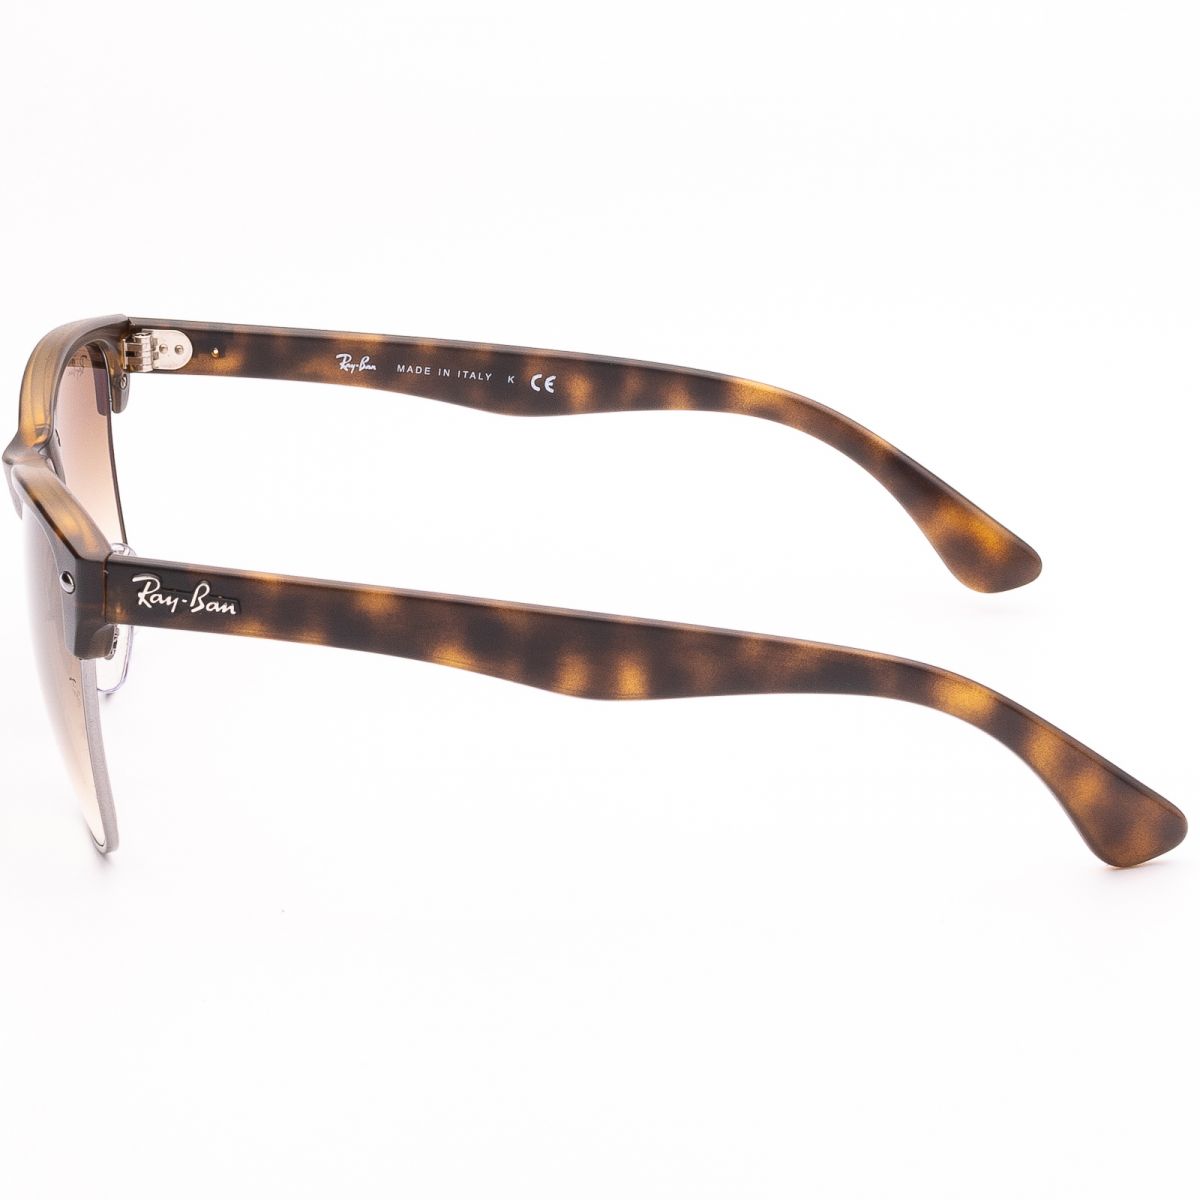 Cool Hunting Picks for Protective, Stylish Sunglasses - COOL HUNTING®